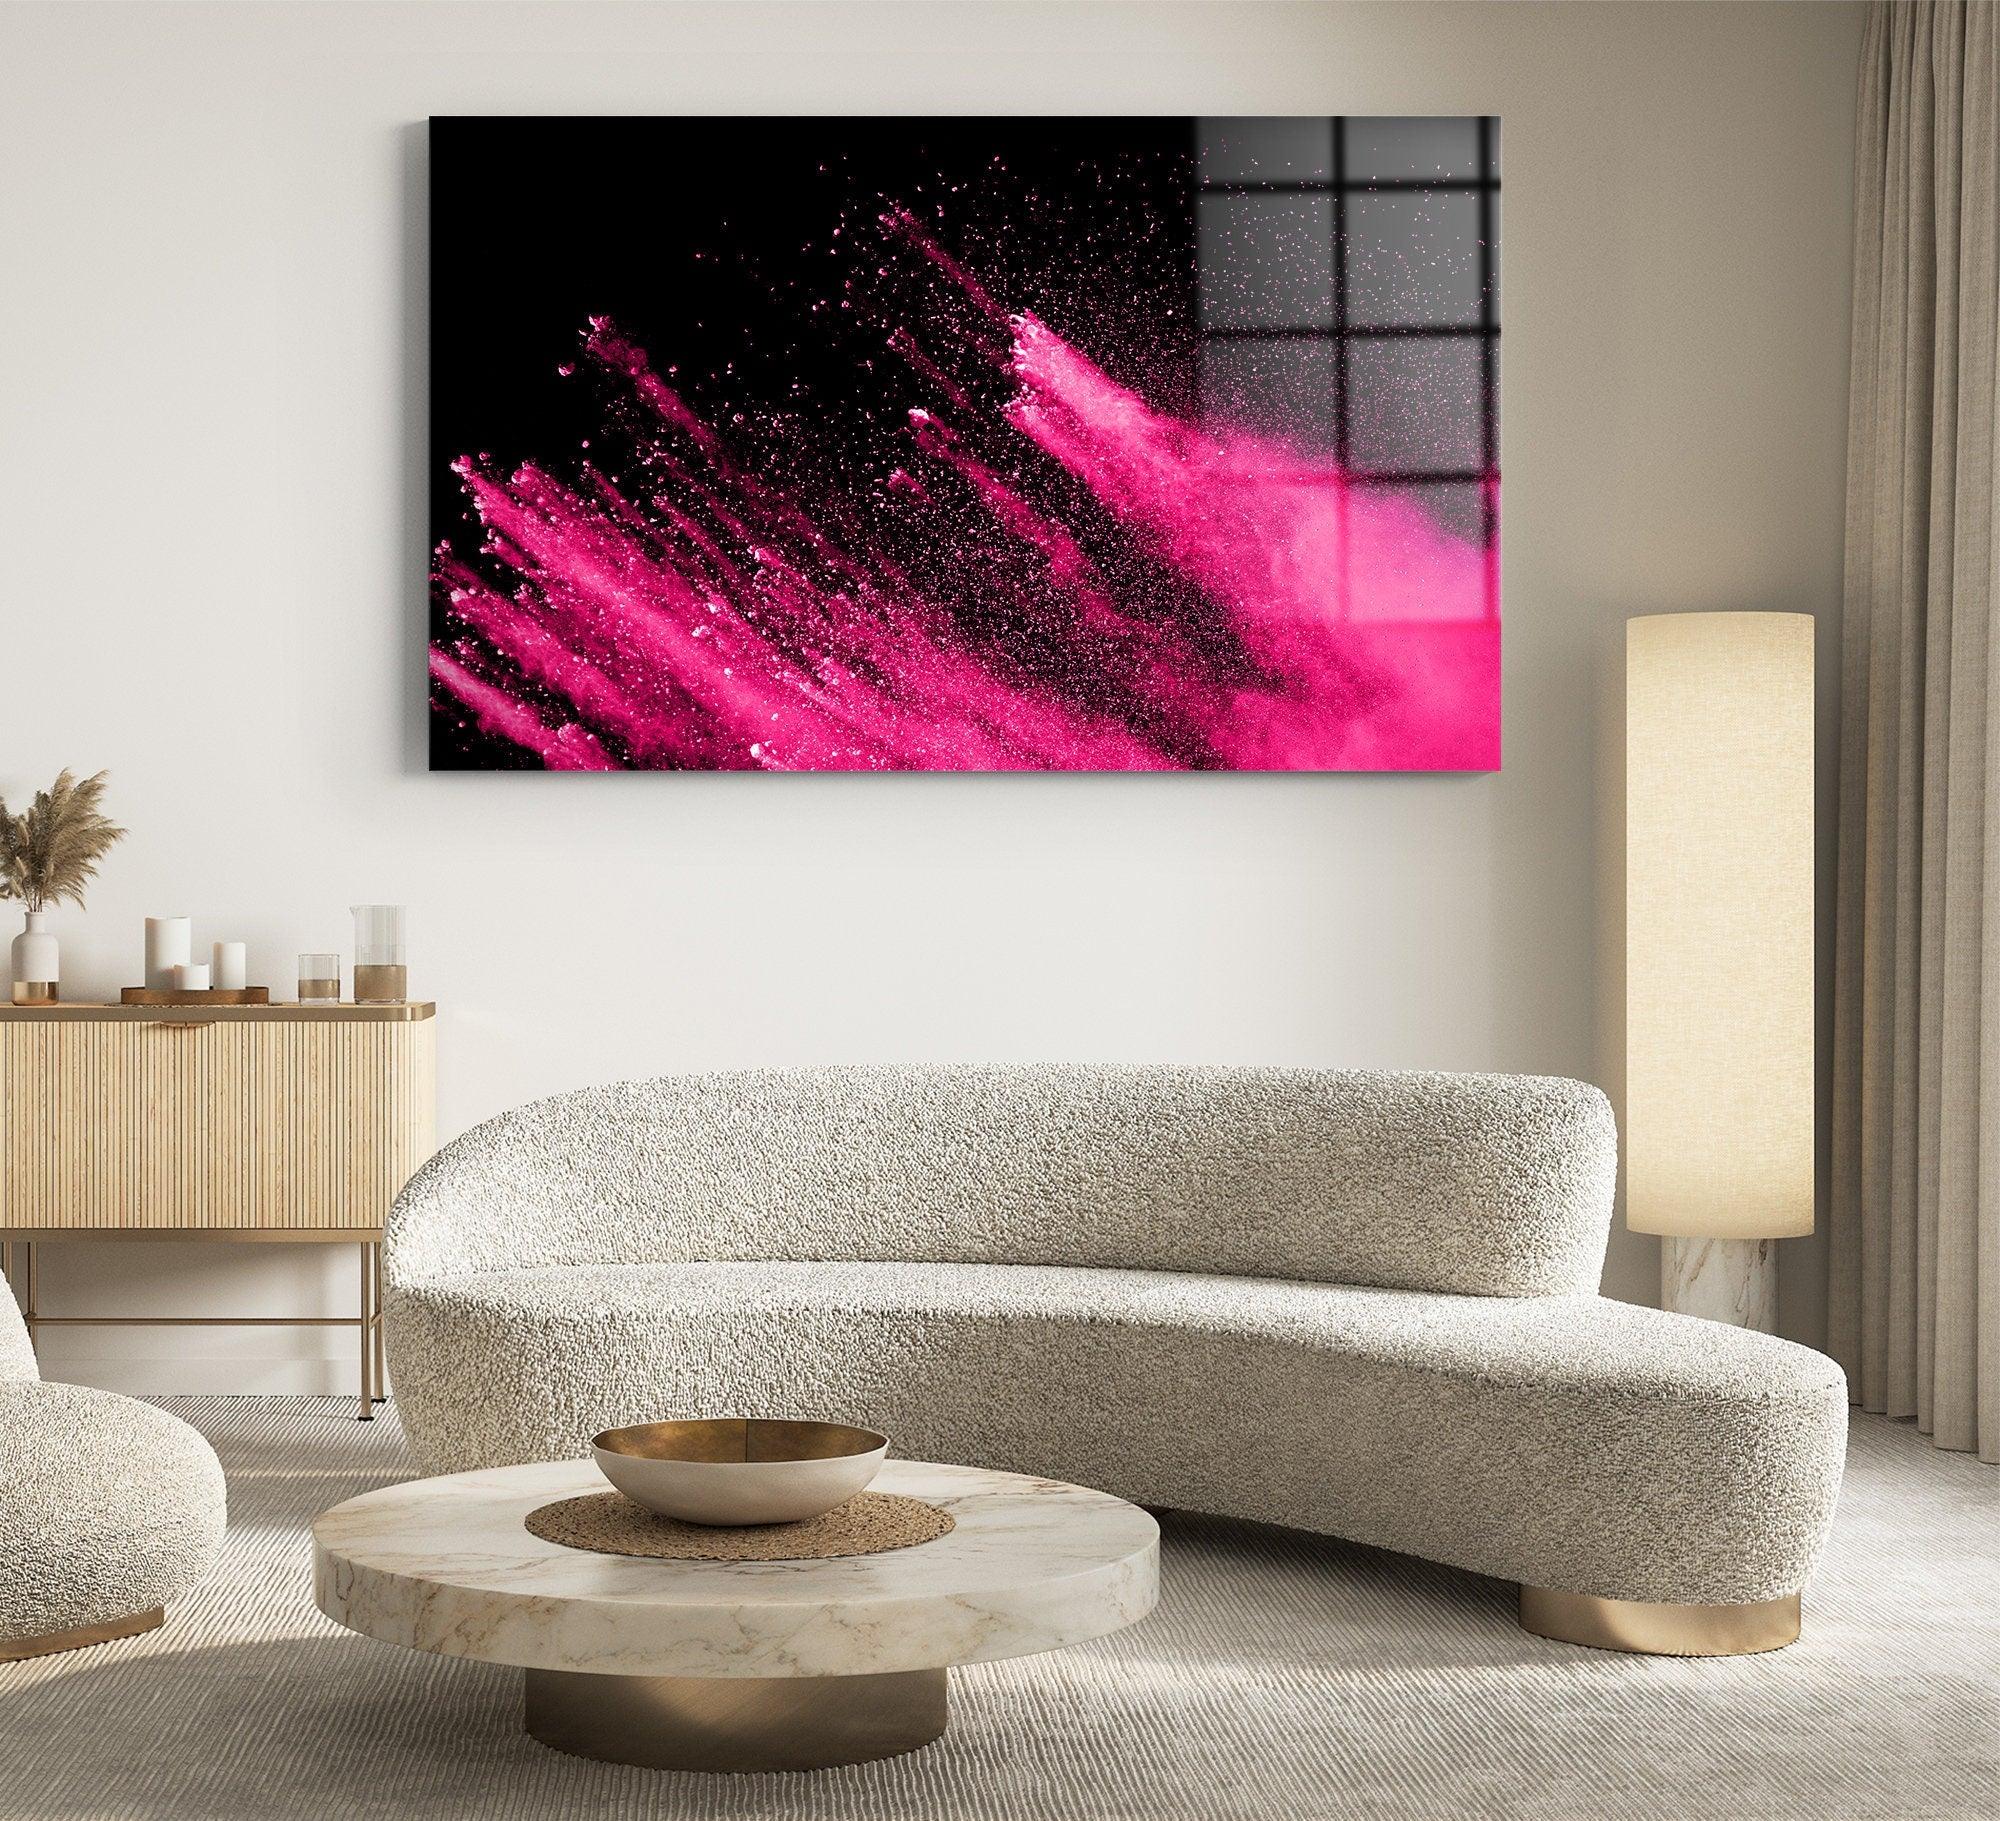 12 Pieces Danish Pastel Room Decor Green And Pink Wall Art Poster Aesthetic Room  Decor Unframed Canvas Abstract Posters For Living Room Teen Room |  forum.iktva.sa